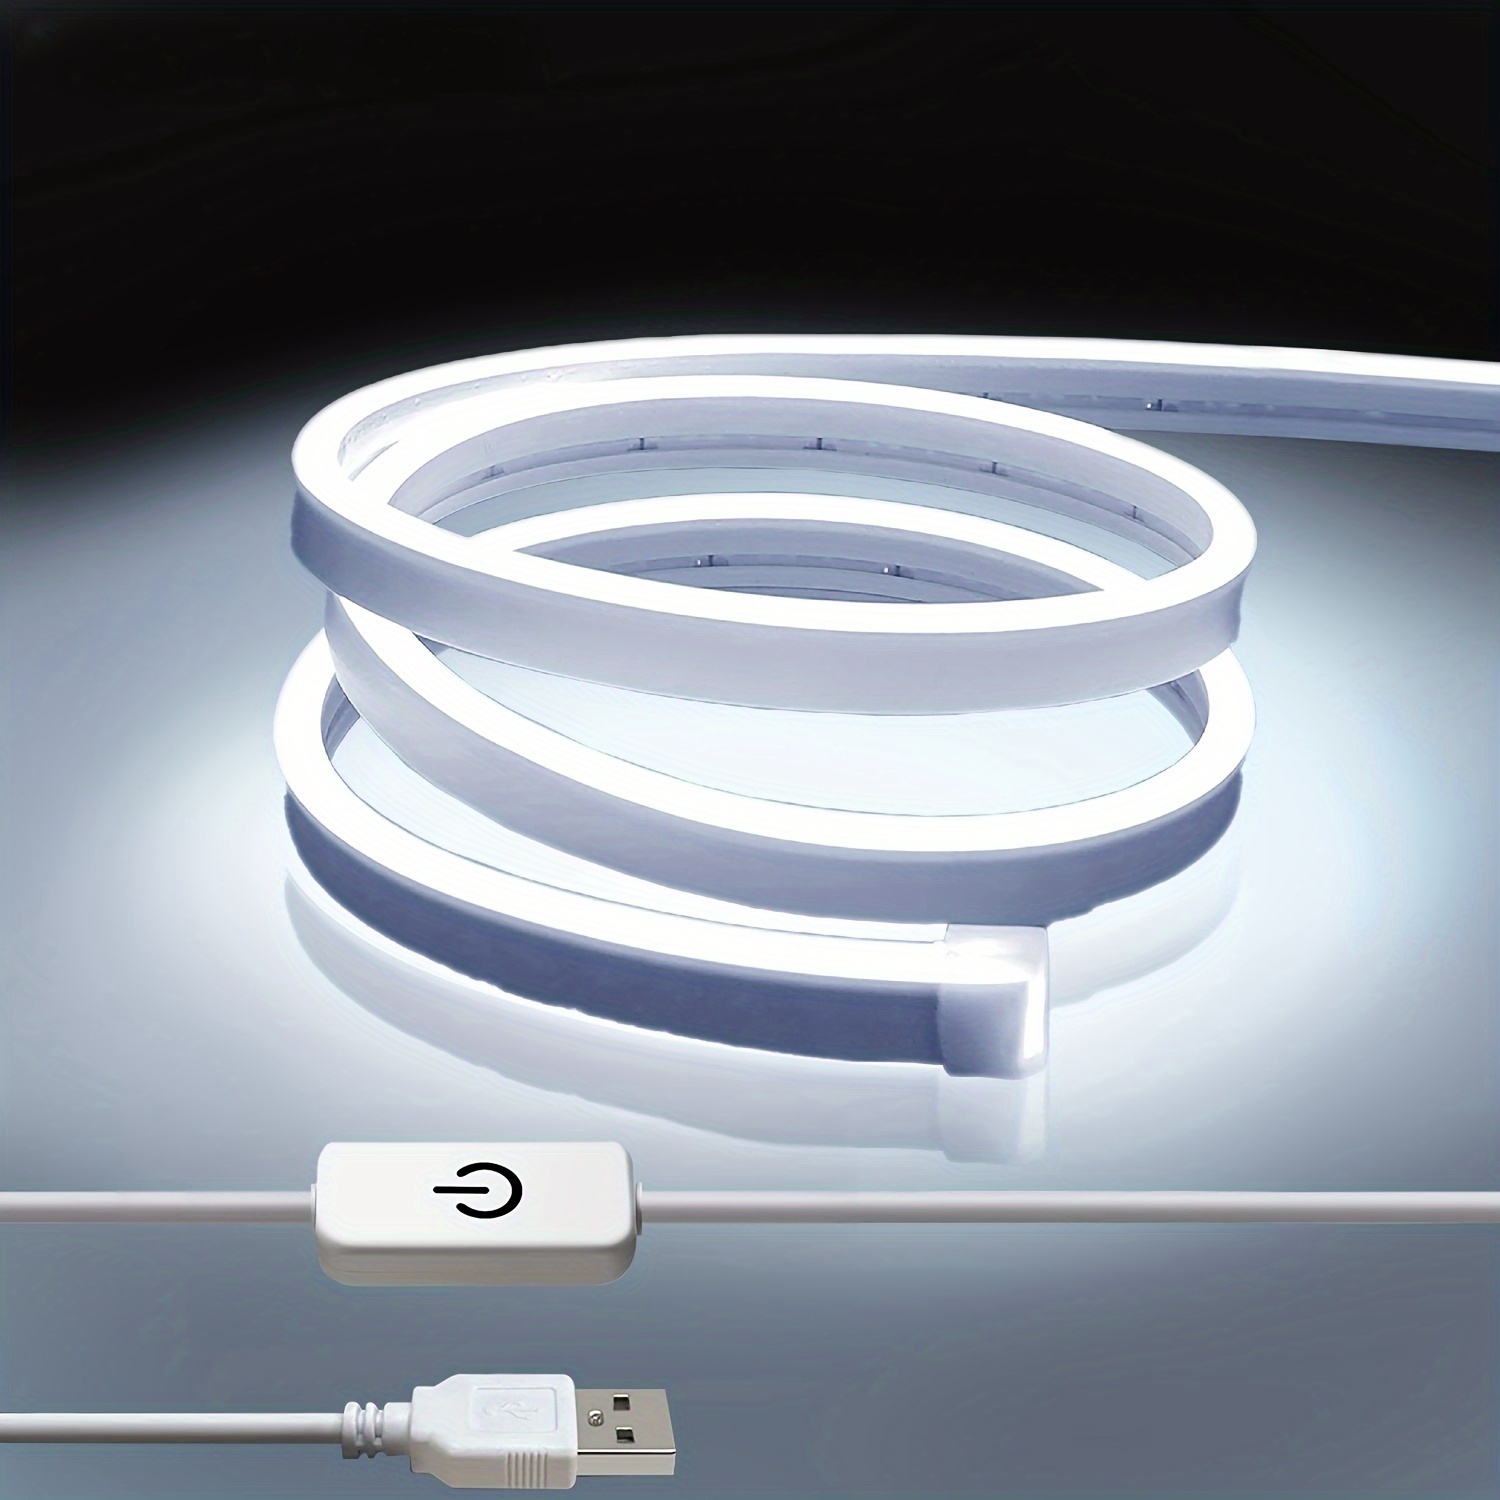 

Brighten Up Your Home With 5v Usb Neon Light Led Strip Lights - Perfect For Christmas, Birthday & More!